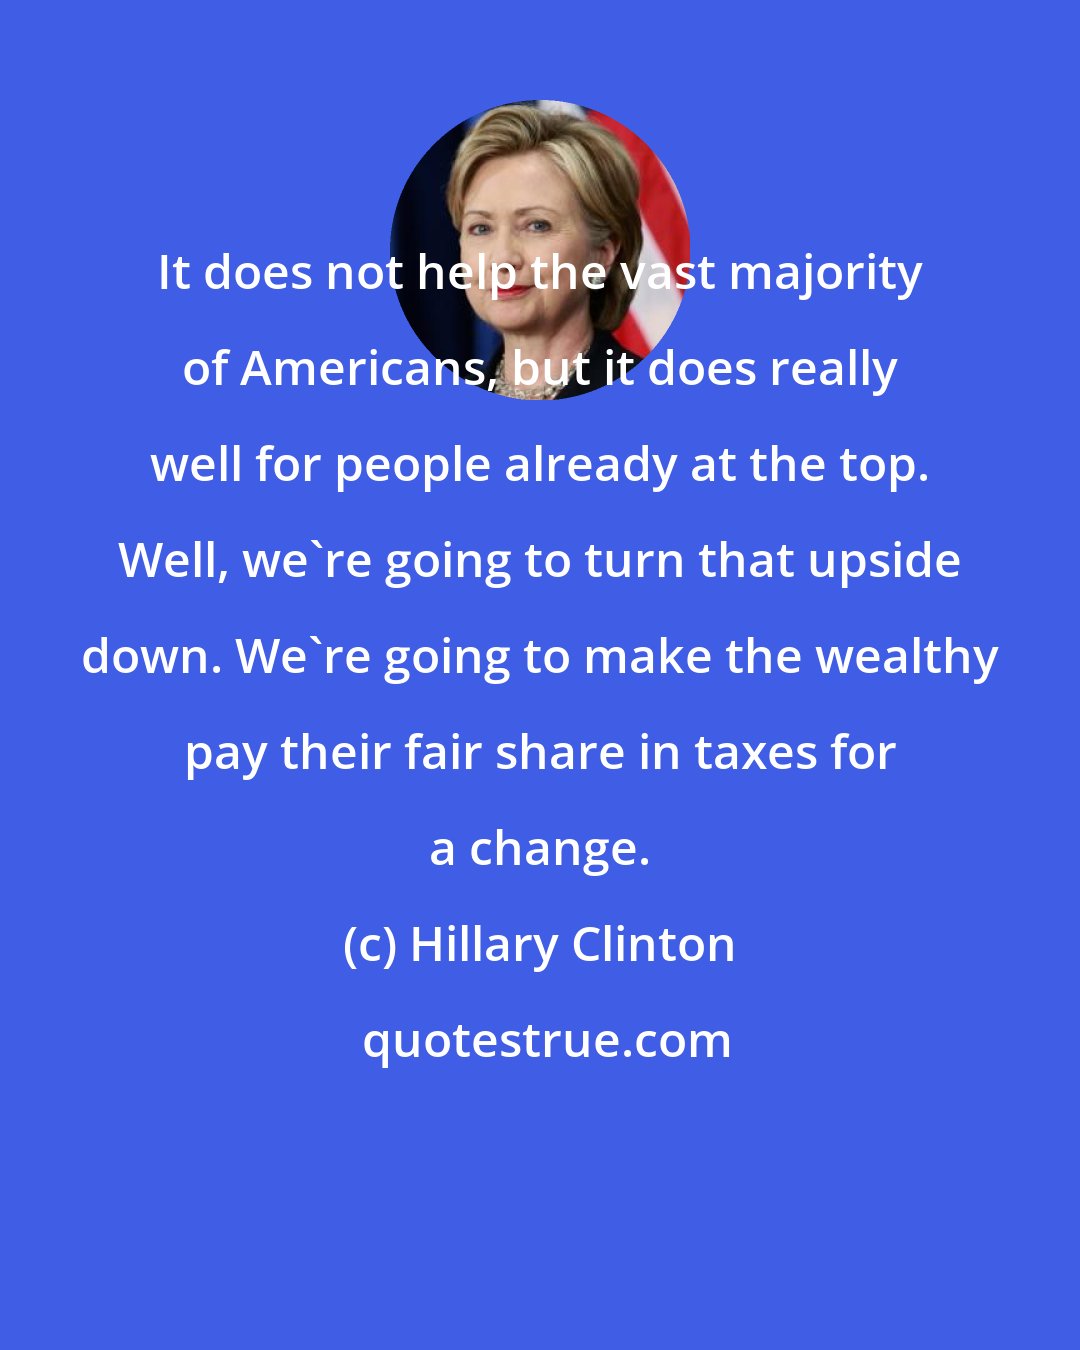 Hillary Clinton: It does not help the vast majority of Americans, but it does really well for people already at the top. Well, we're going to turn that upside down. We're going to make the wealthy pay their fair share in taxes for a change.